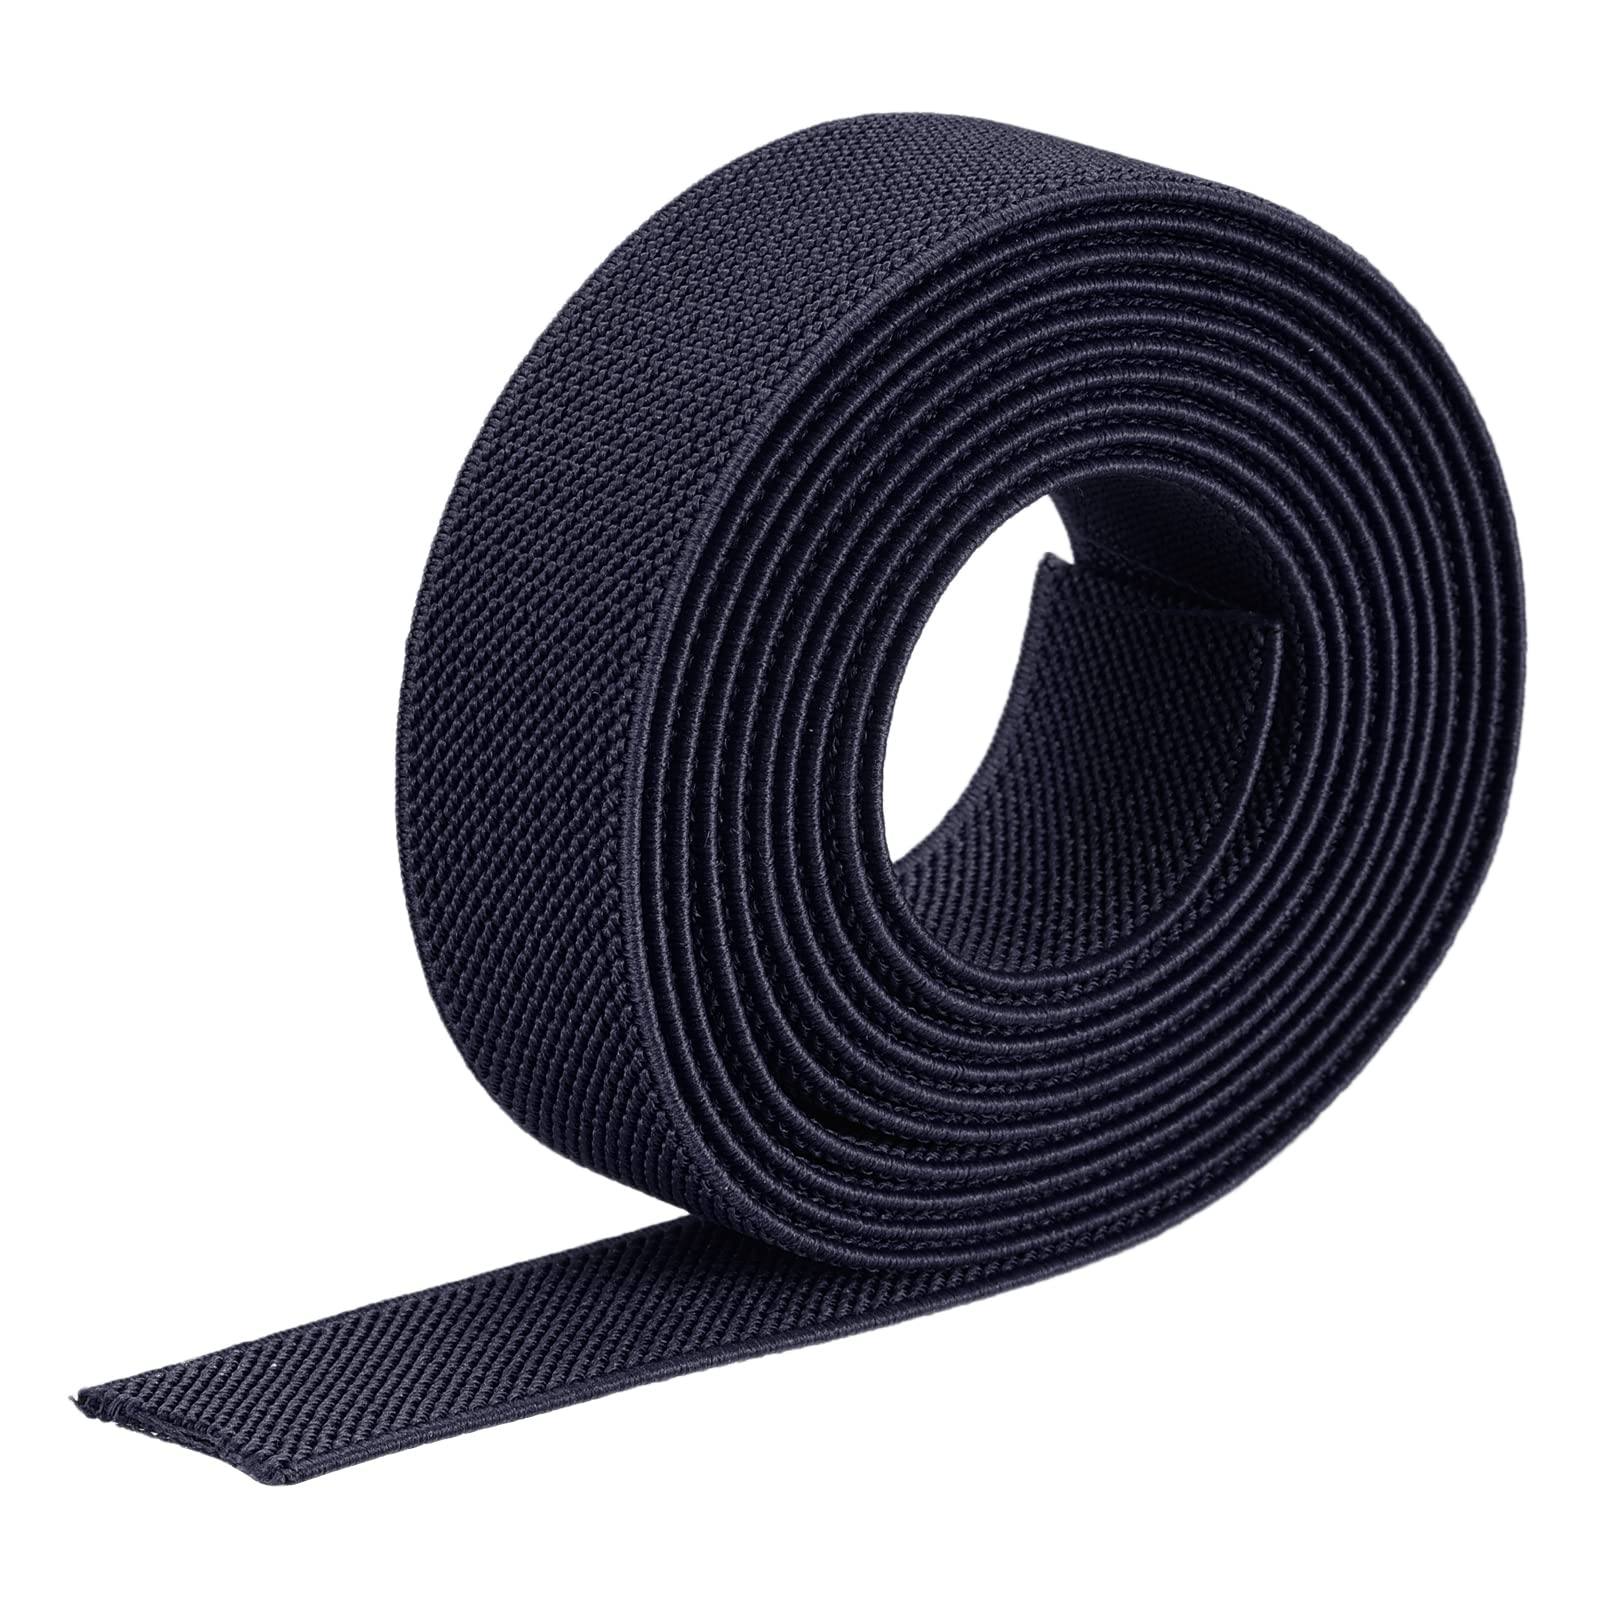 Elastic Webbing - Woven 2 inches